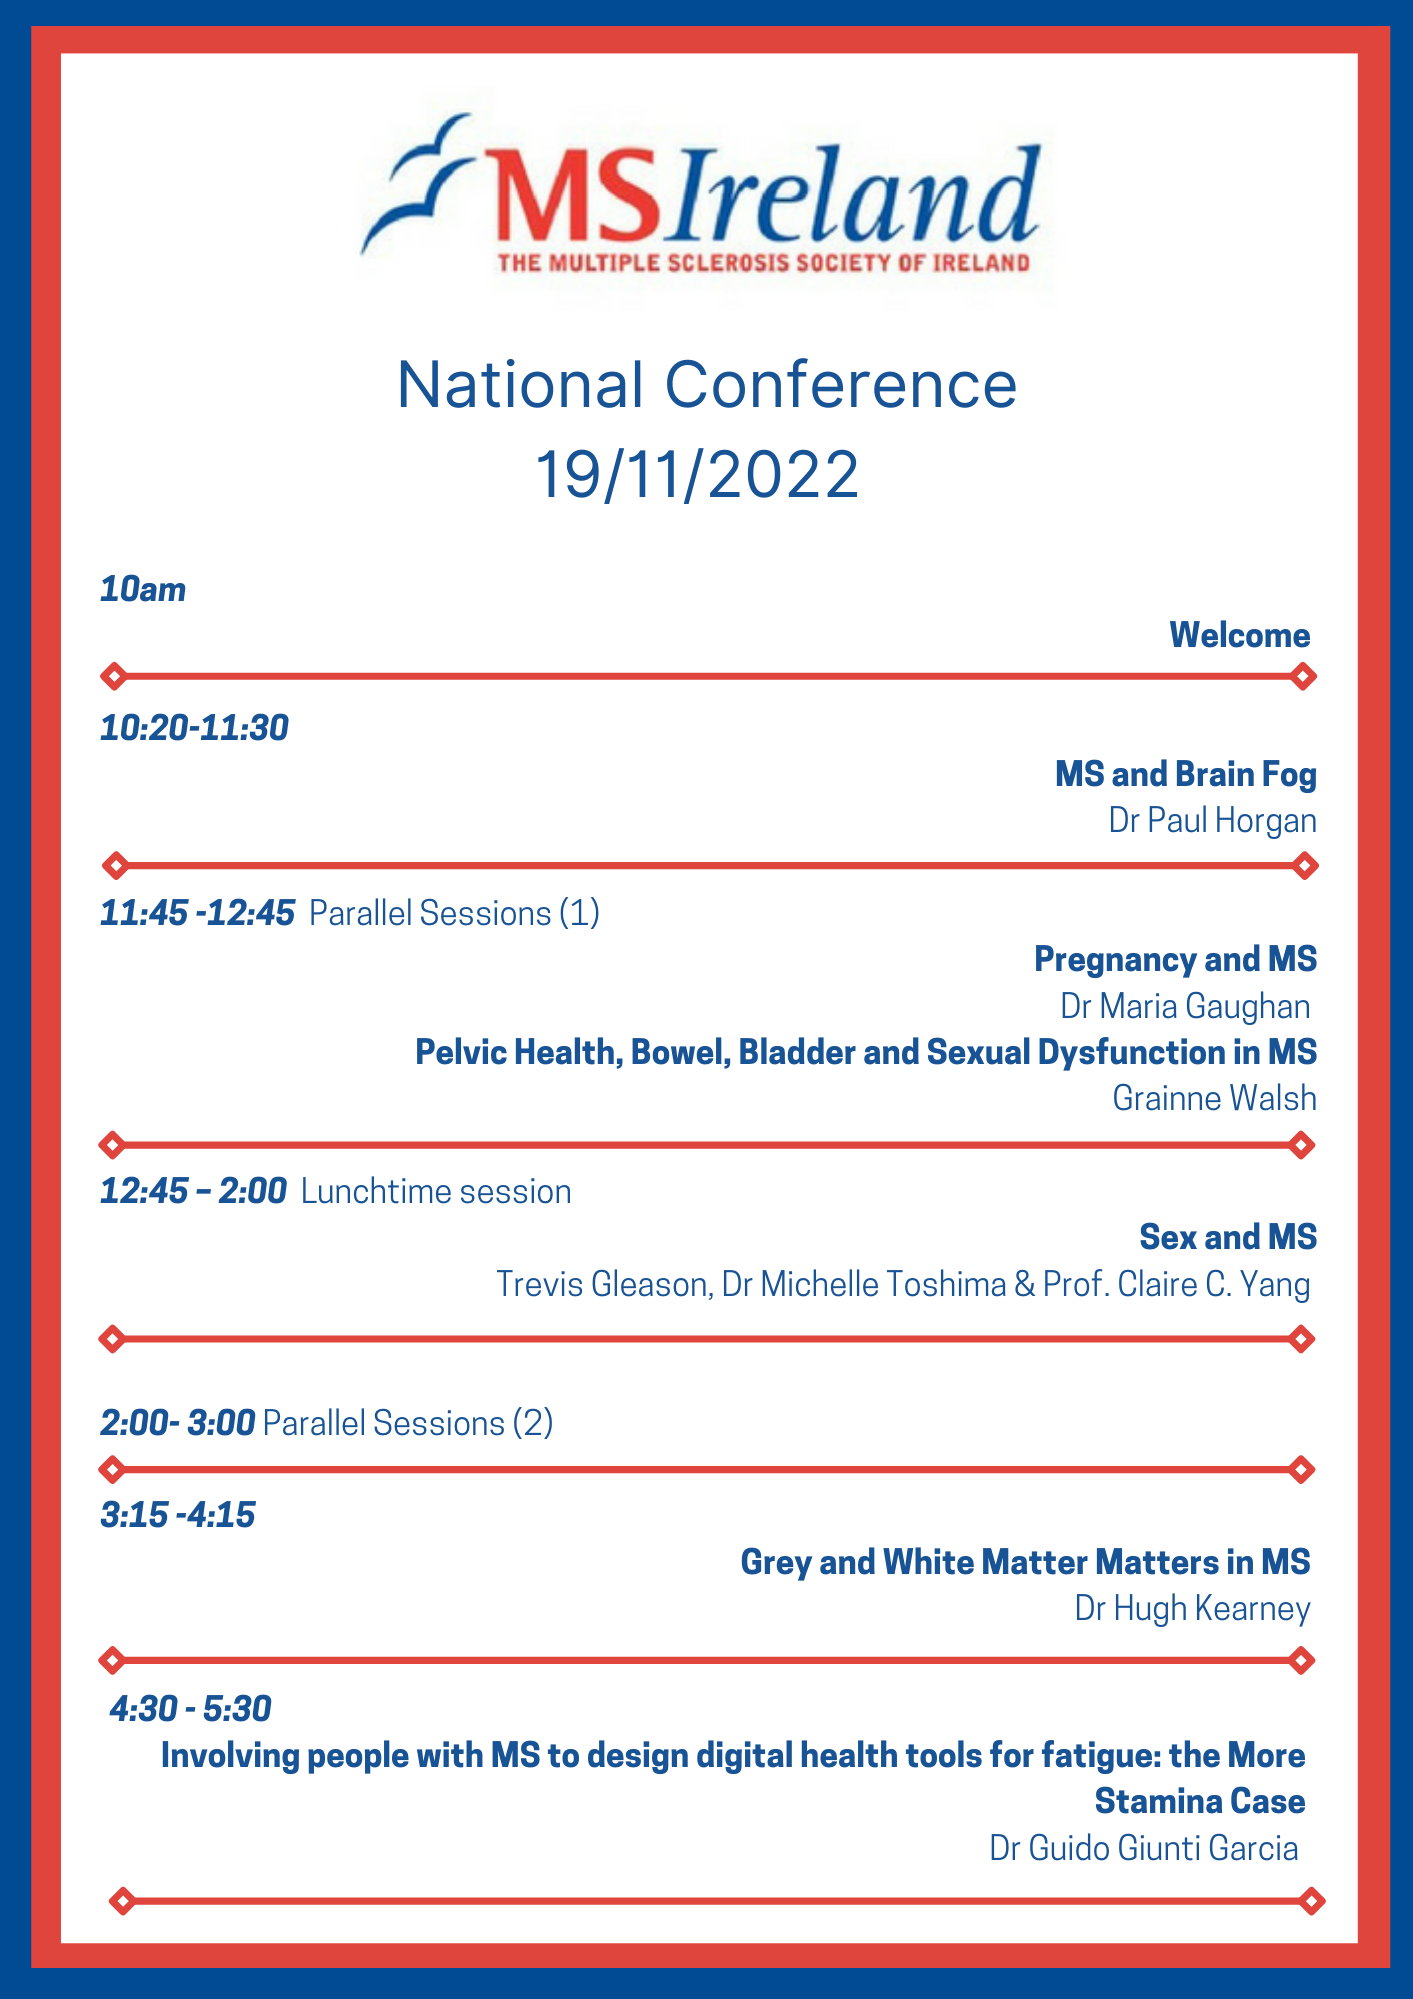 Agenda for the National Conference